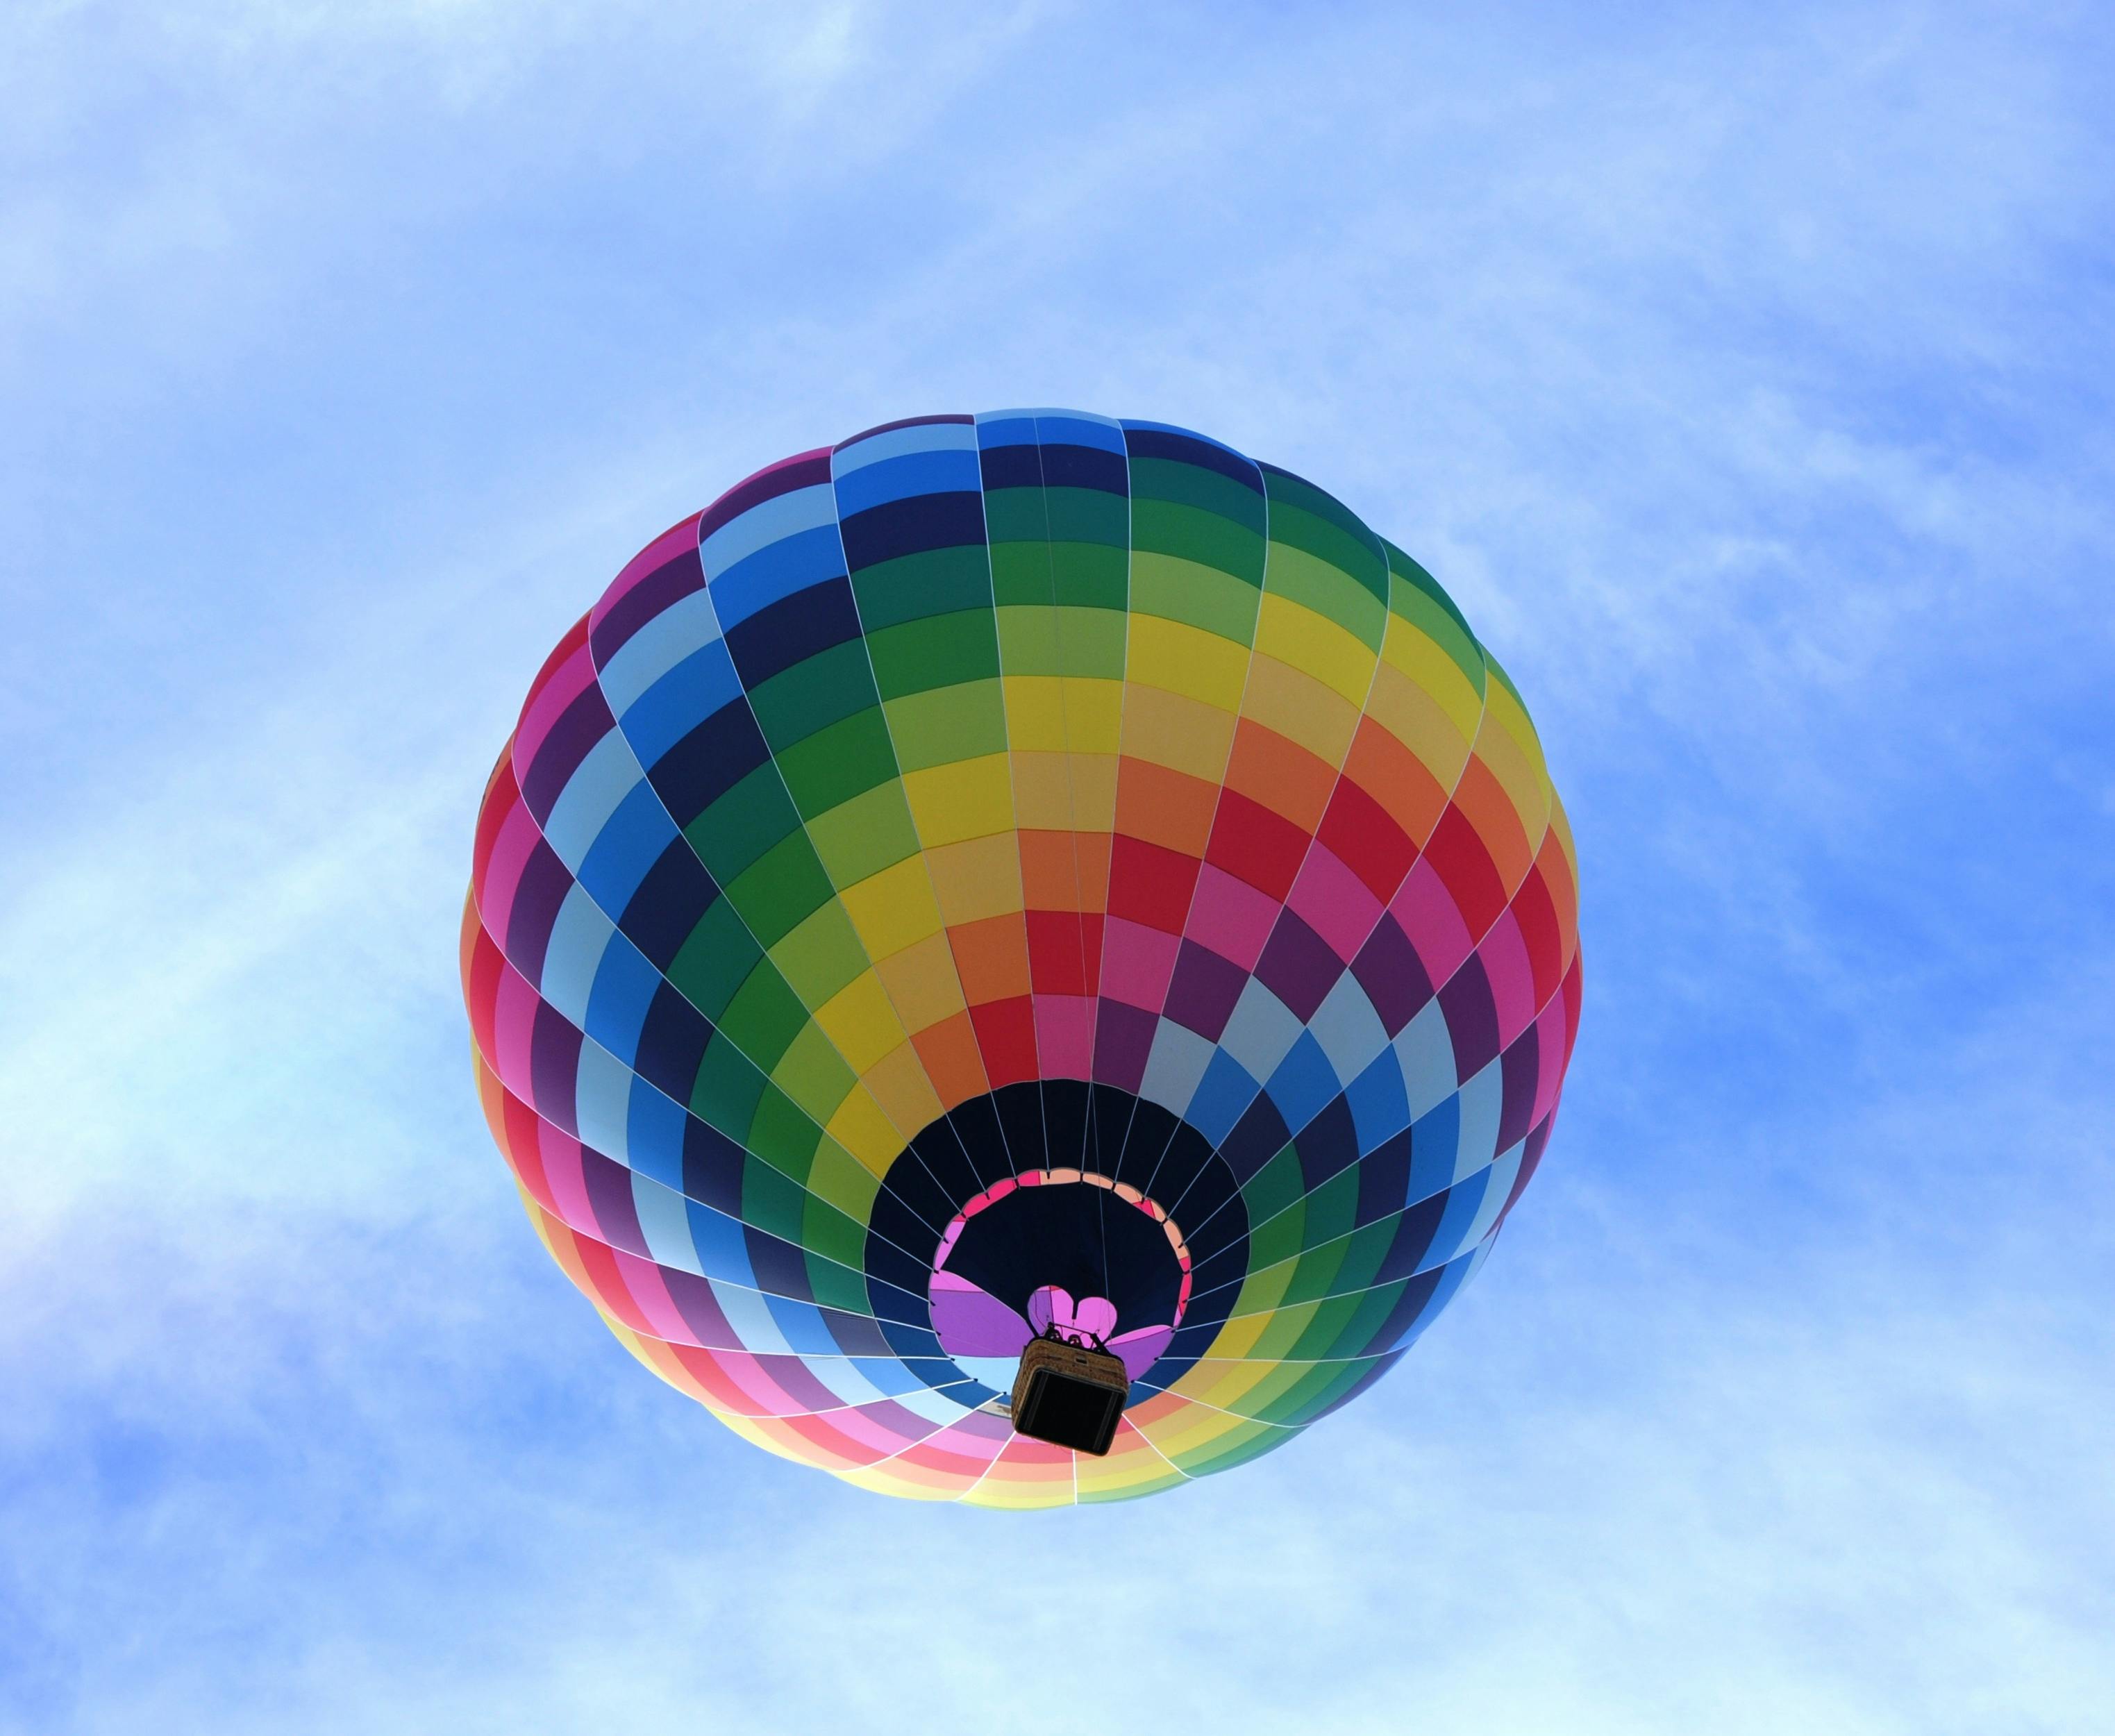 hot air balloon flying under blue sky during daytime